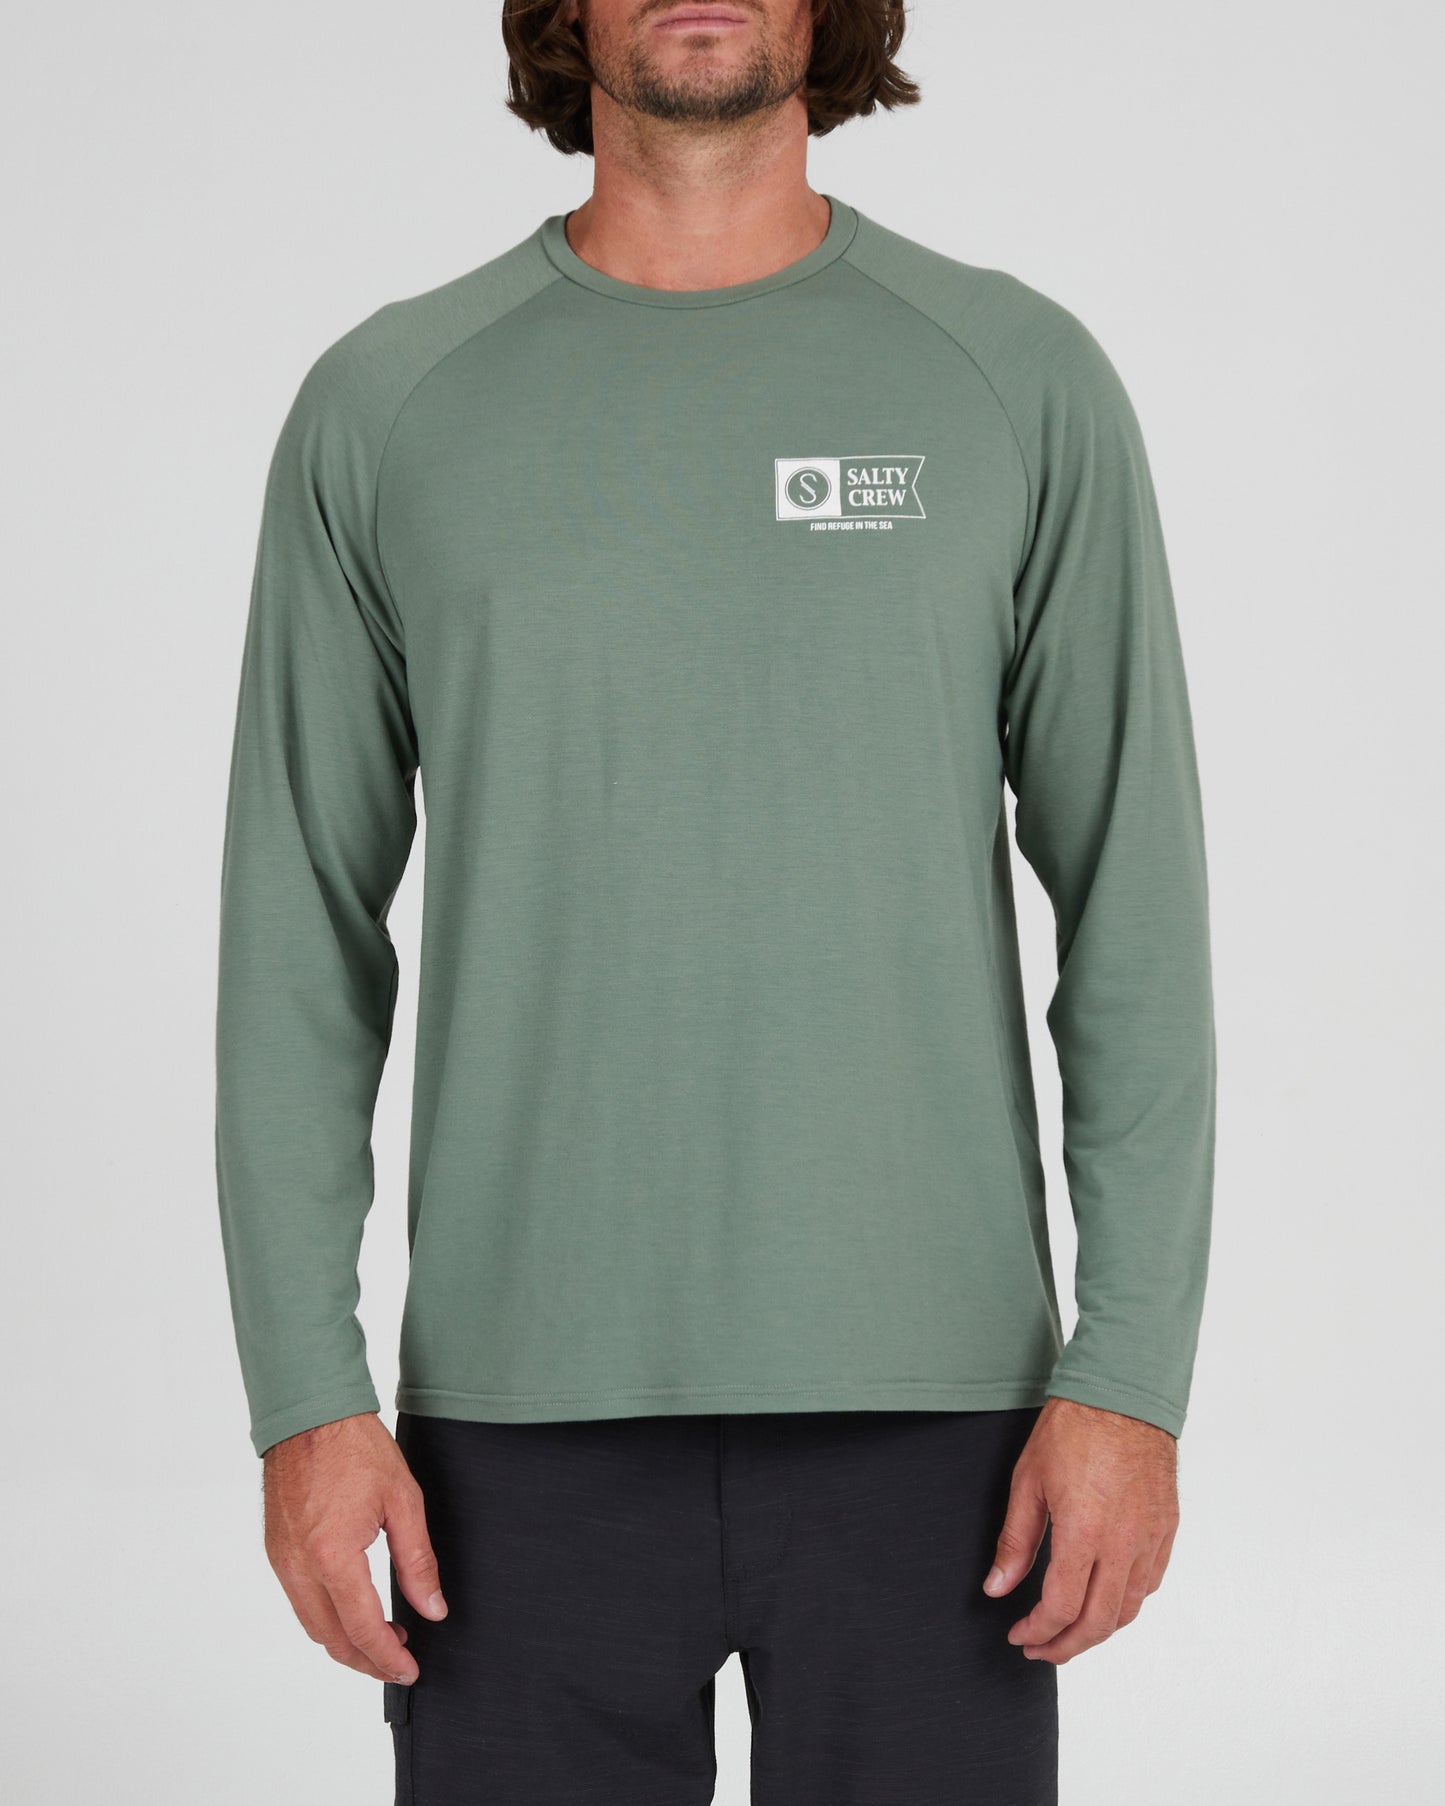 front view of Mariner UV Fatigue L/S Tee